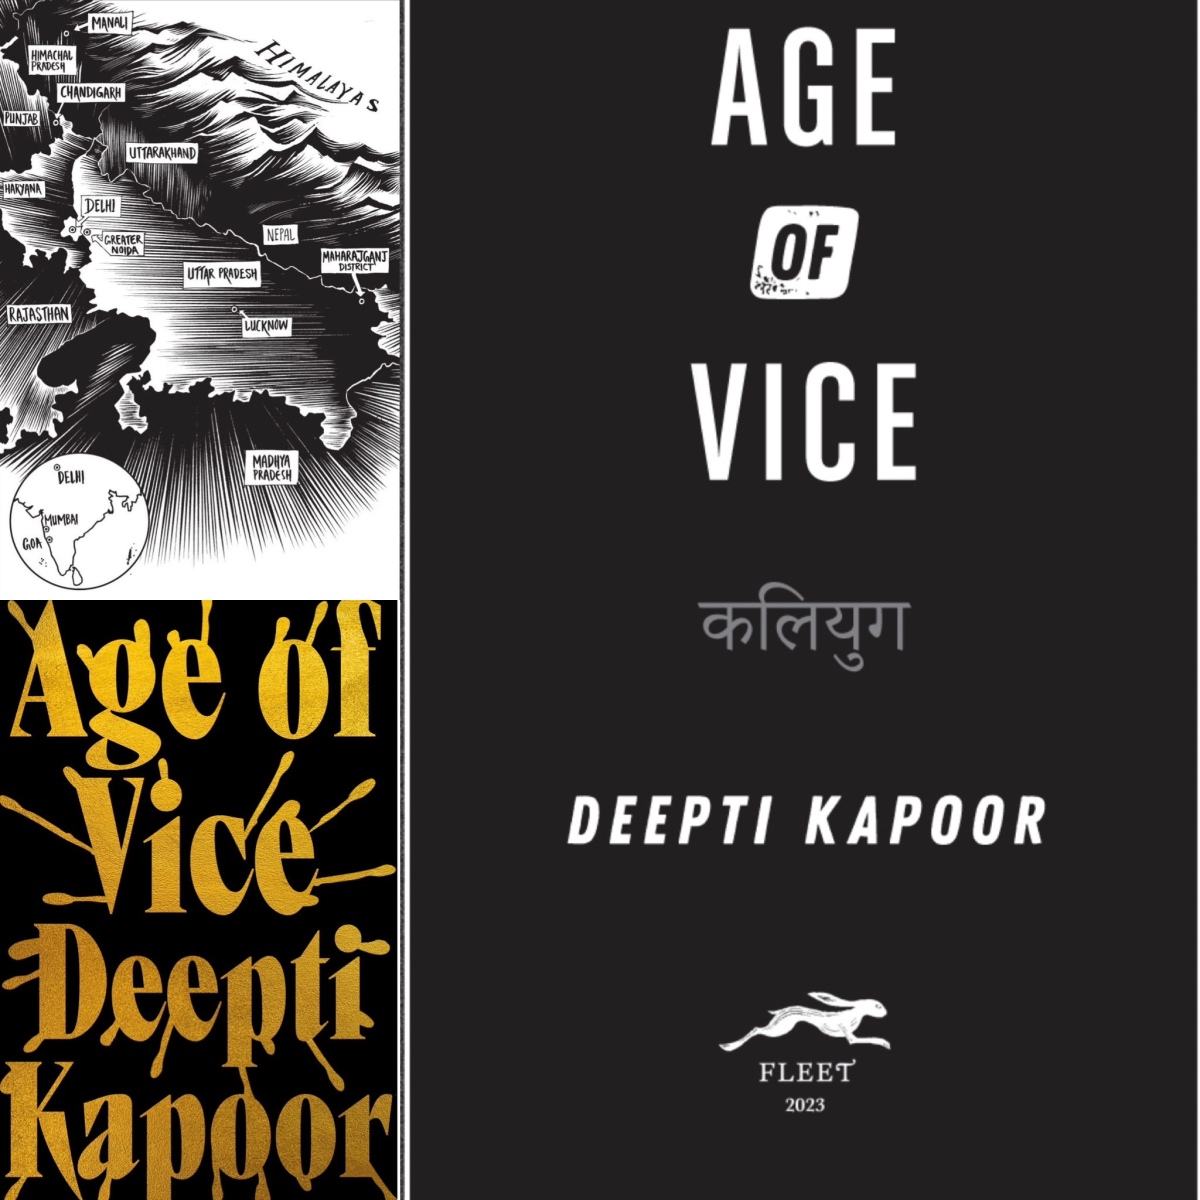 Age of Vice. Deepti Kapoor